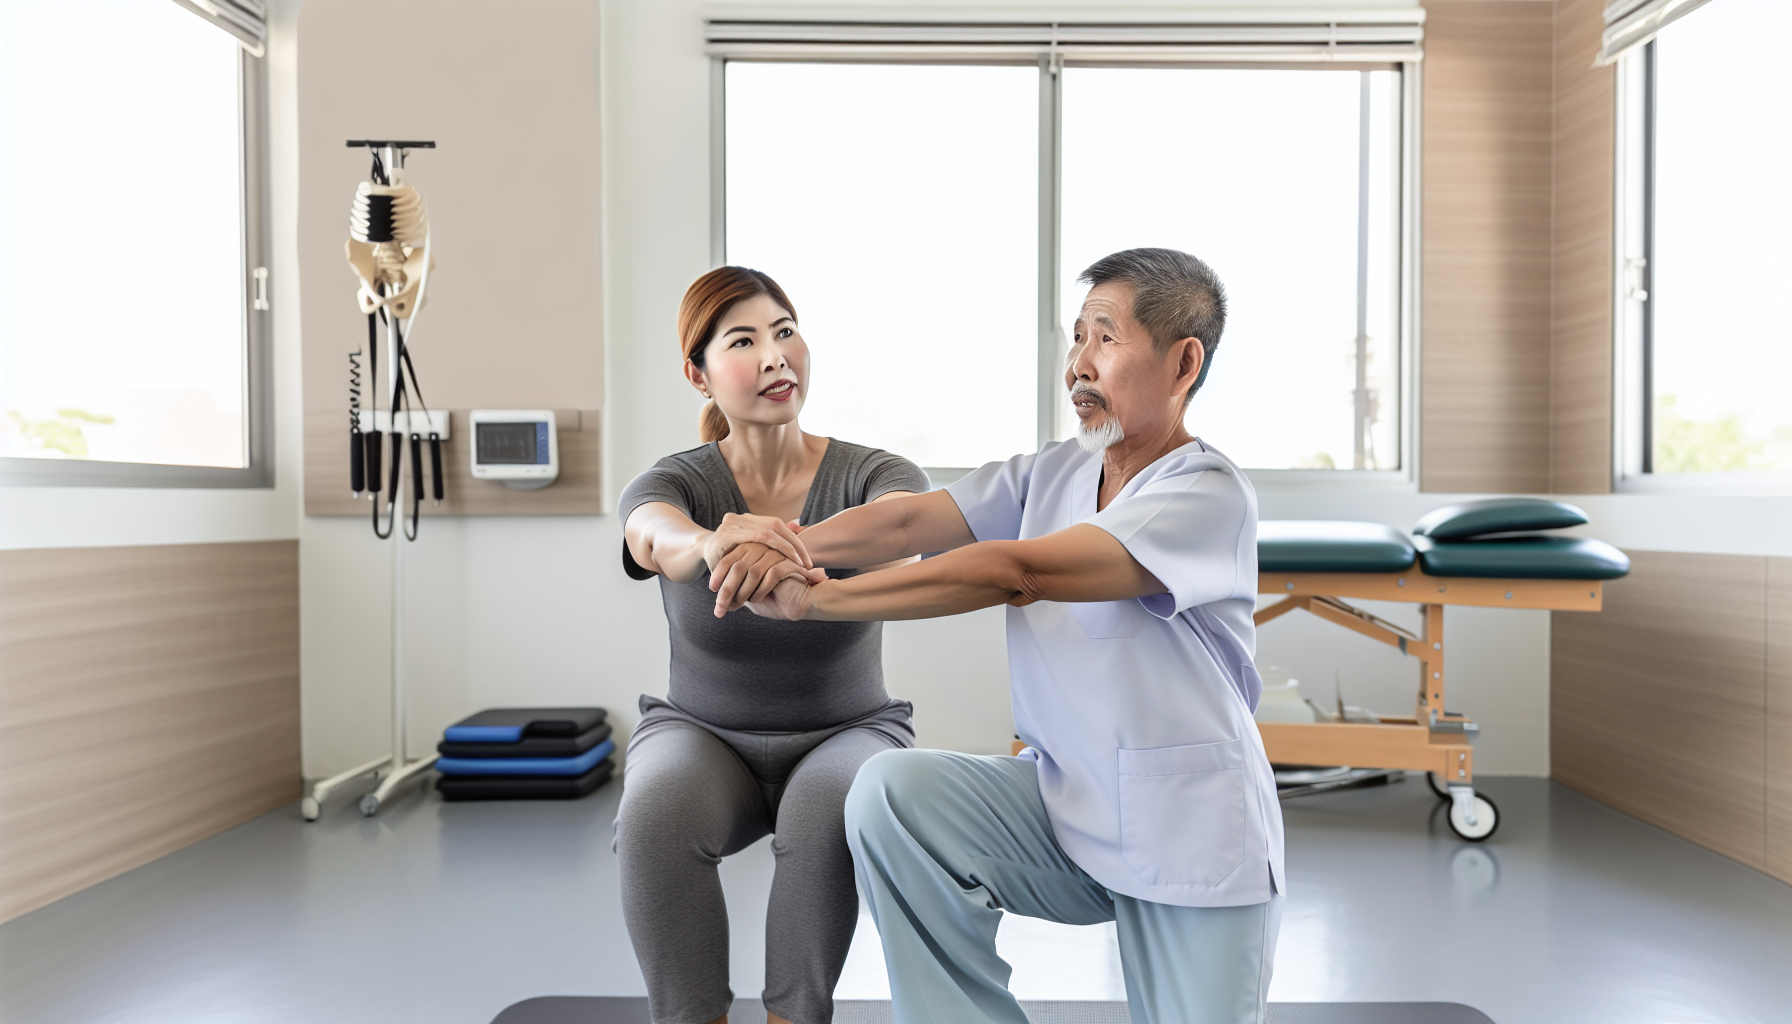 Physical therapist assisting a patient with core stabilization exercises